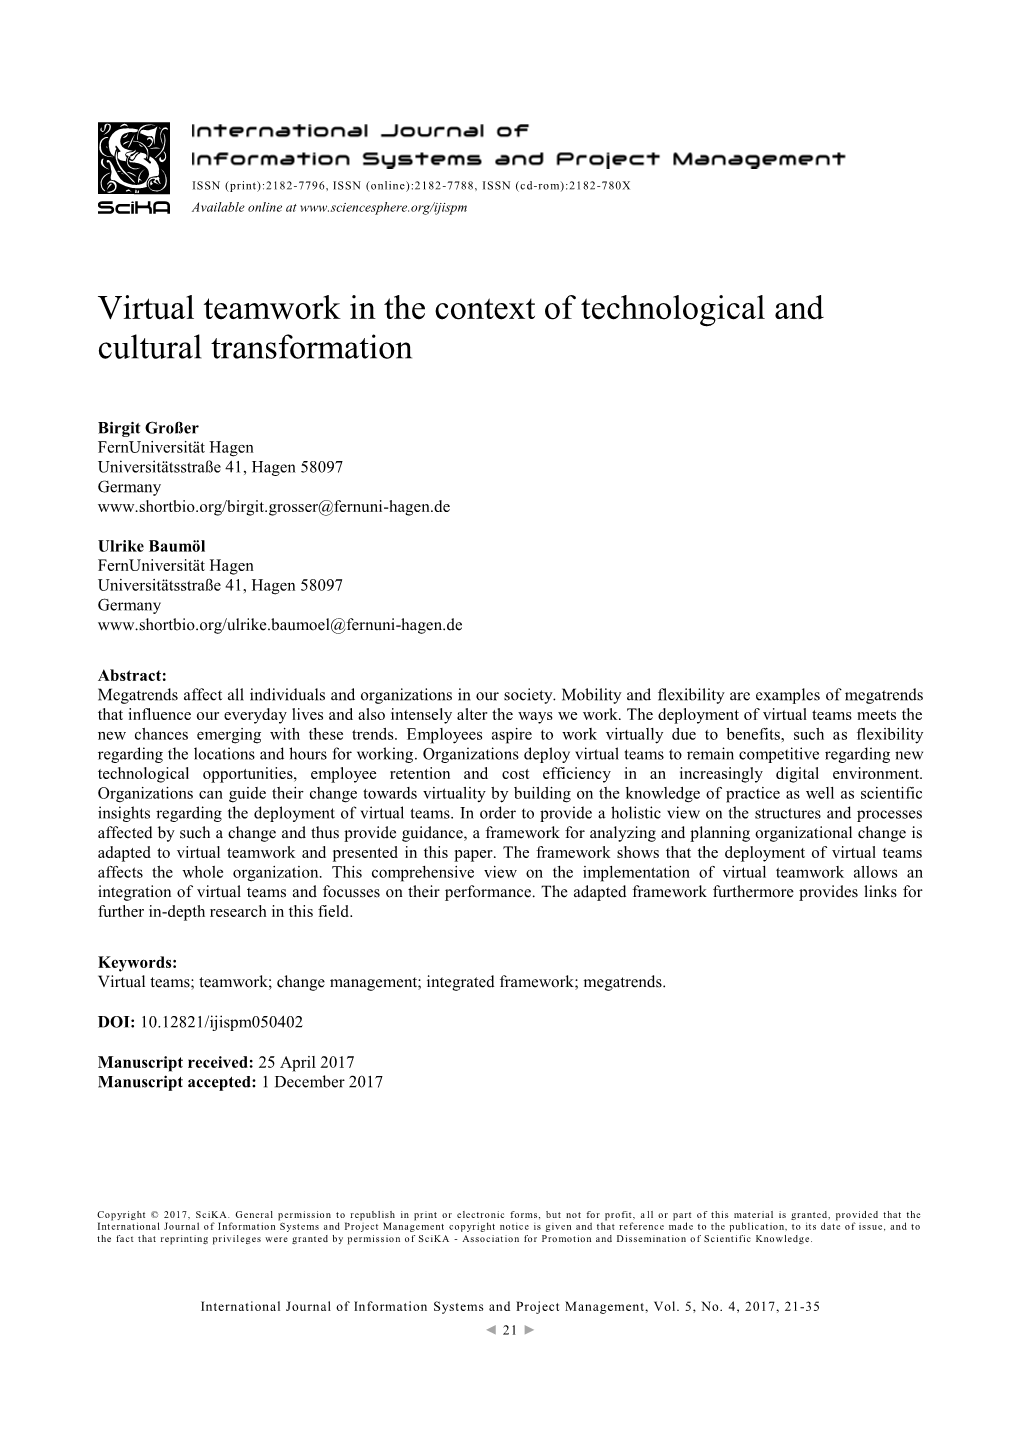 Virtual Teamwork in the Context of Technological and Cultural Transformation